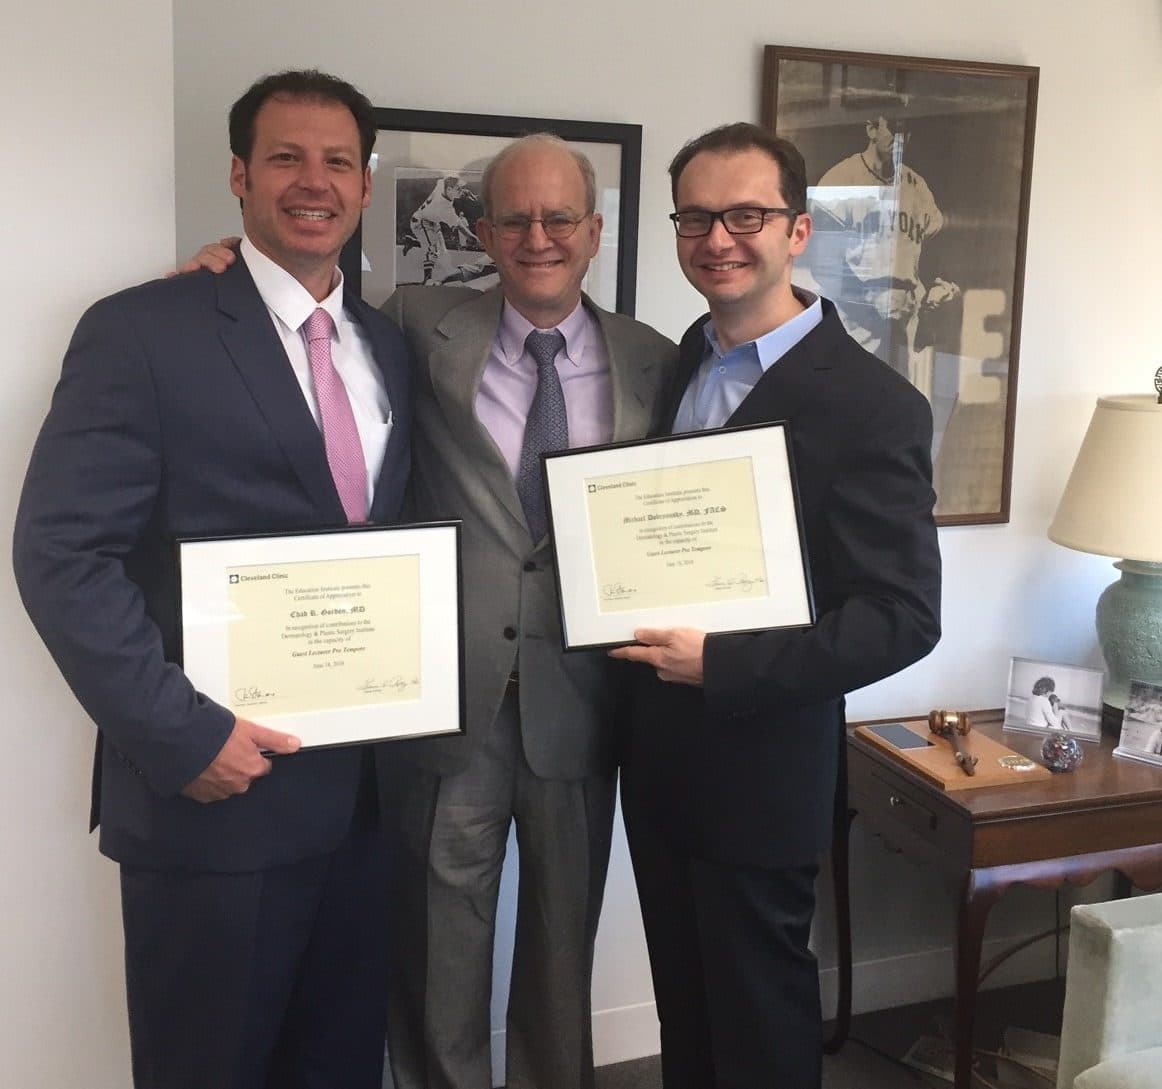 Dr. James Zins, Chairman of Plastic Surgery, Cleveland Clinic (center) and Dr. Chad Gordon, Assistant Professor of Plastic and Reconstructive Surgery, Johns Hopkins, (left) with Dr. Michael Dobryansky (right).